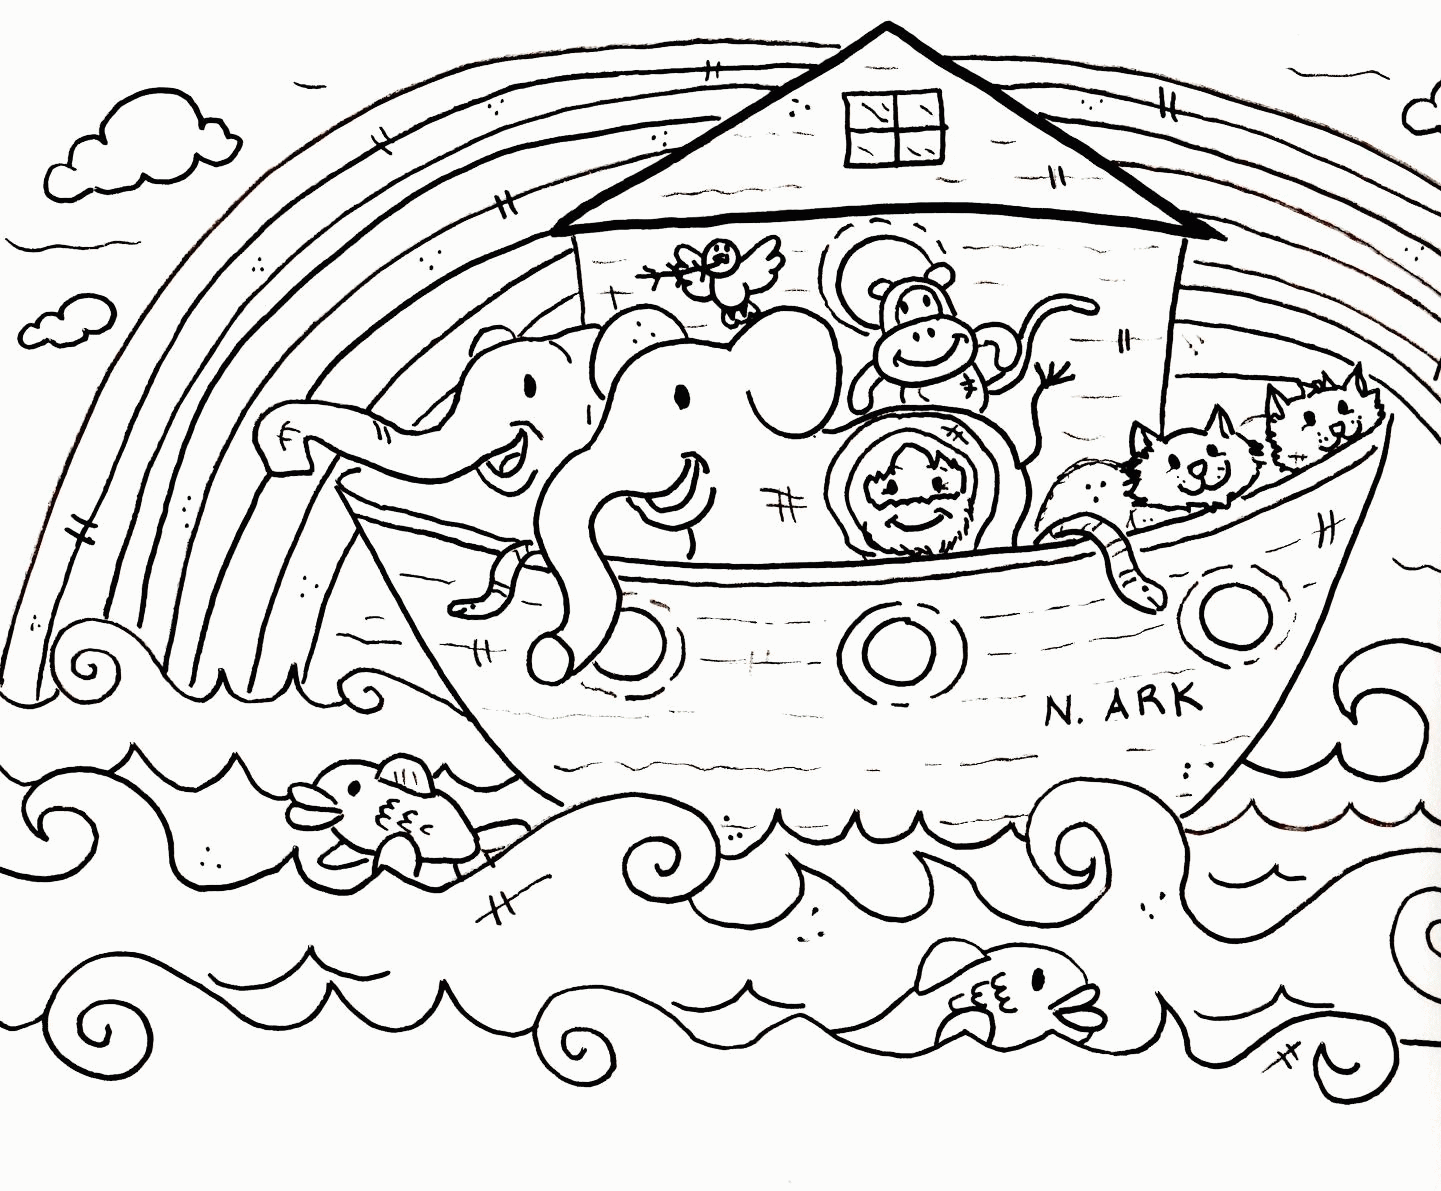 Coloring Page Amusing Free Bible Coloring Page For Kids Free - Coloring